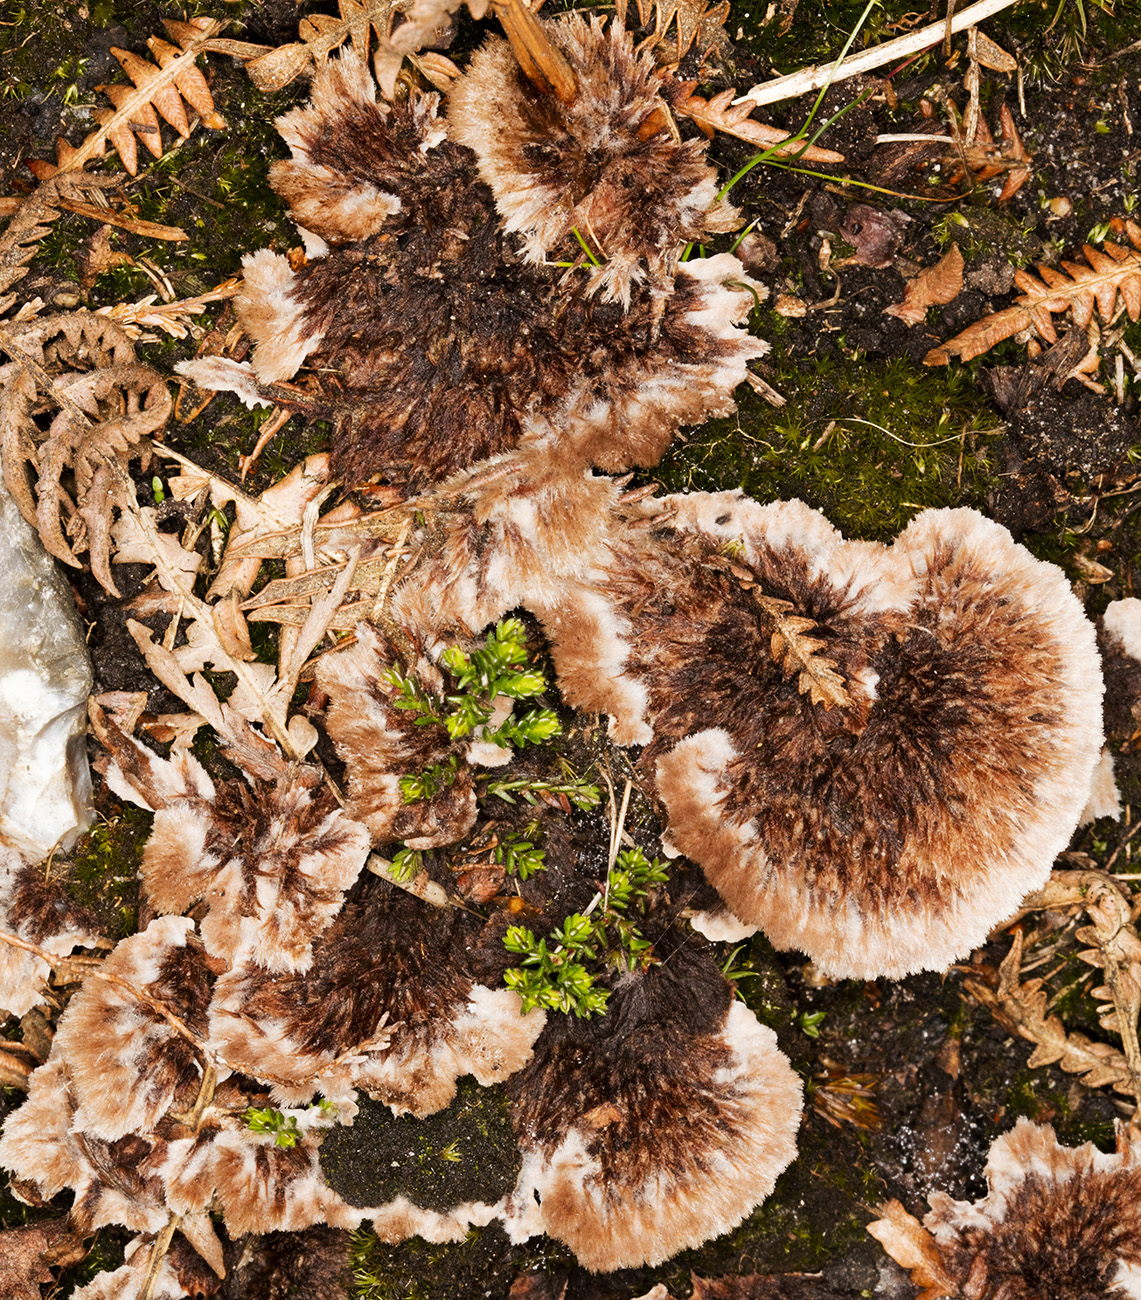 What Does a Fungus Look Like?